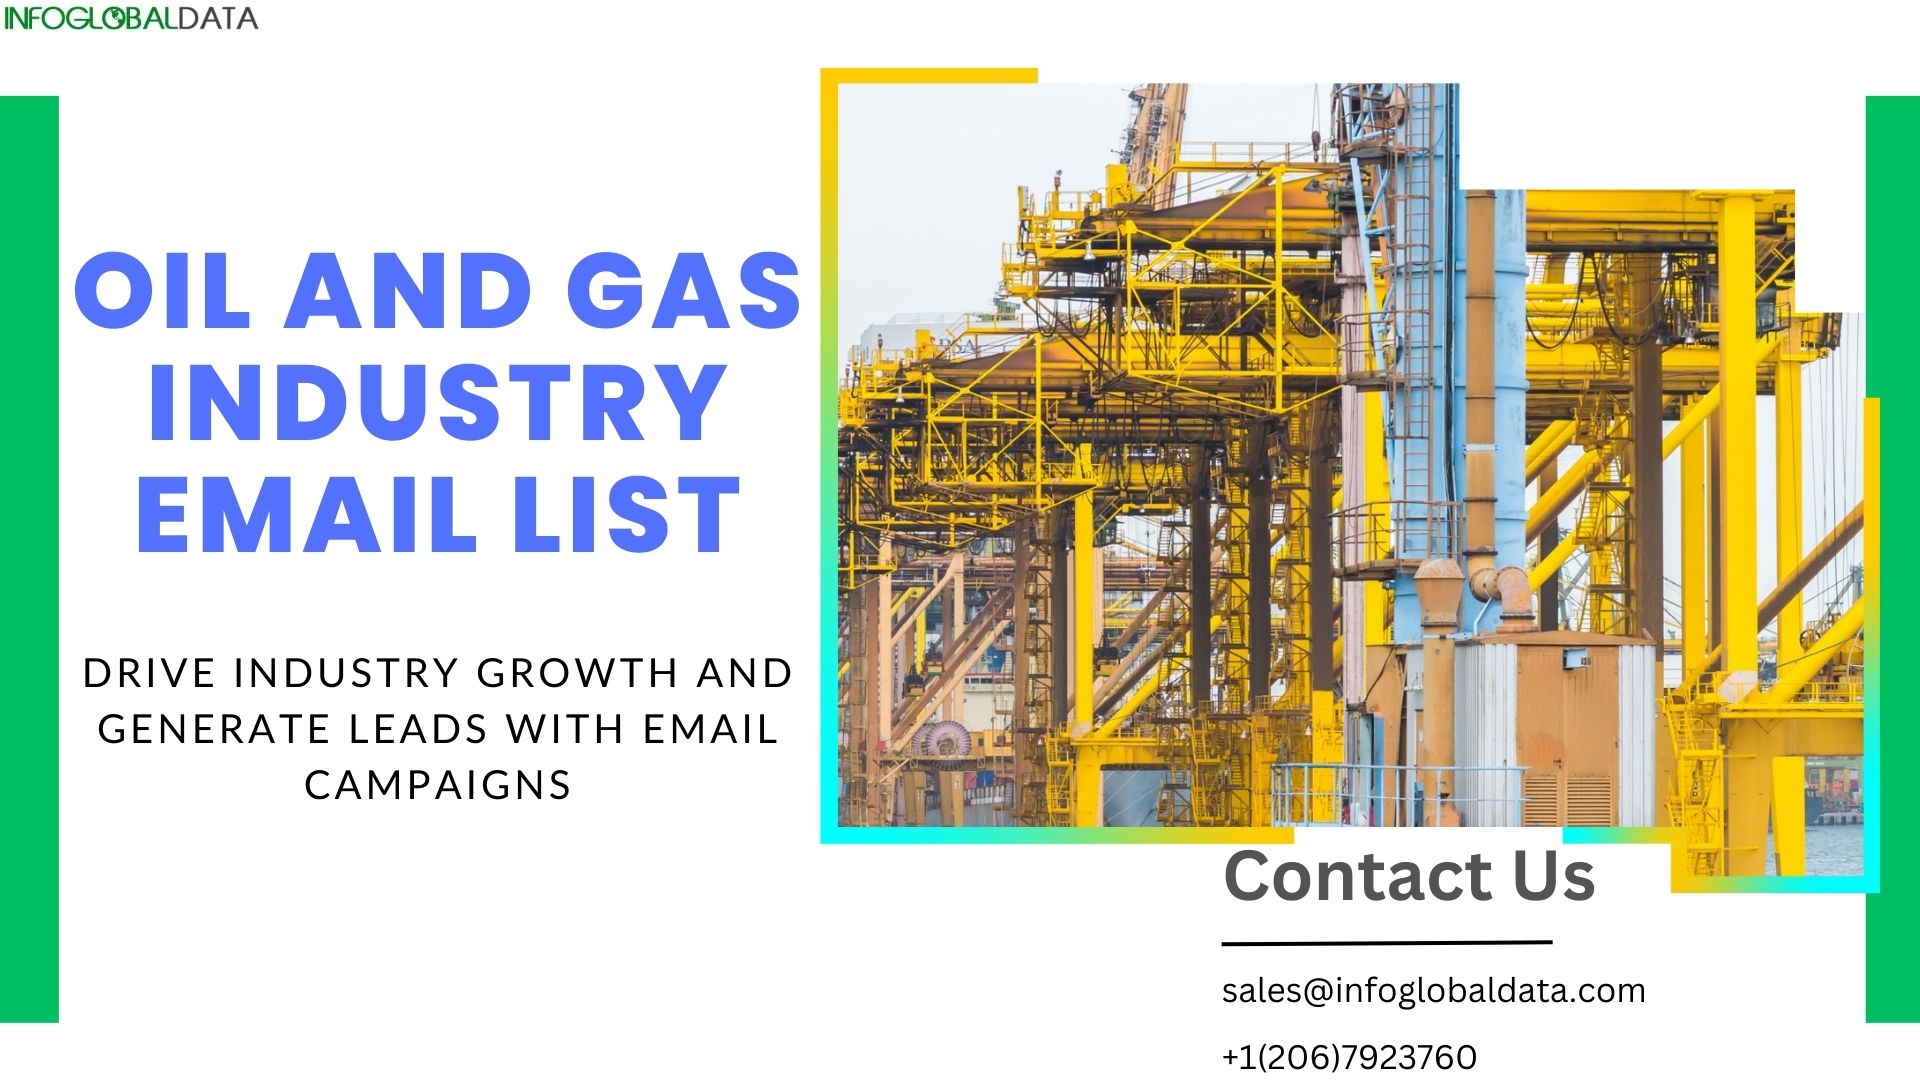 Oil and Gas Industry Email List
